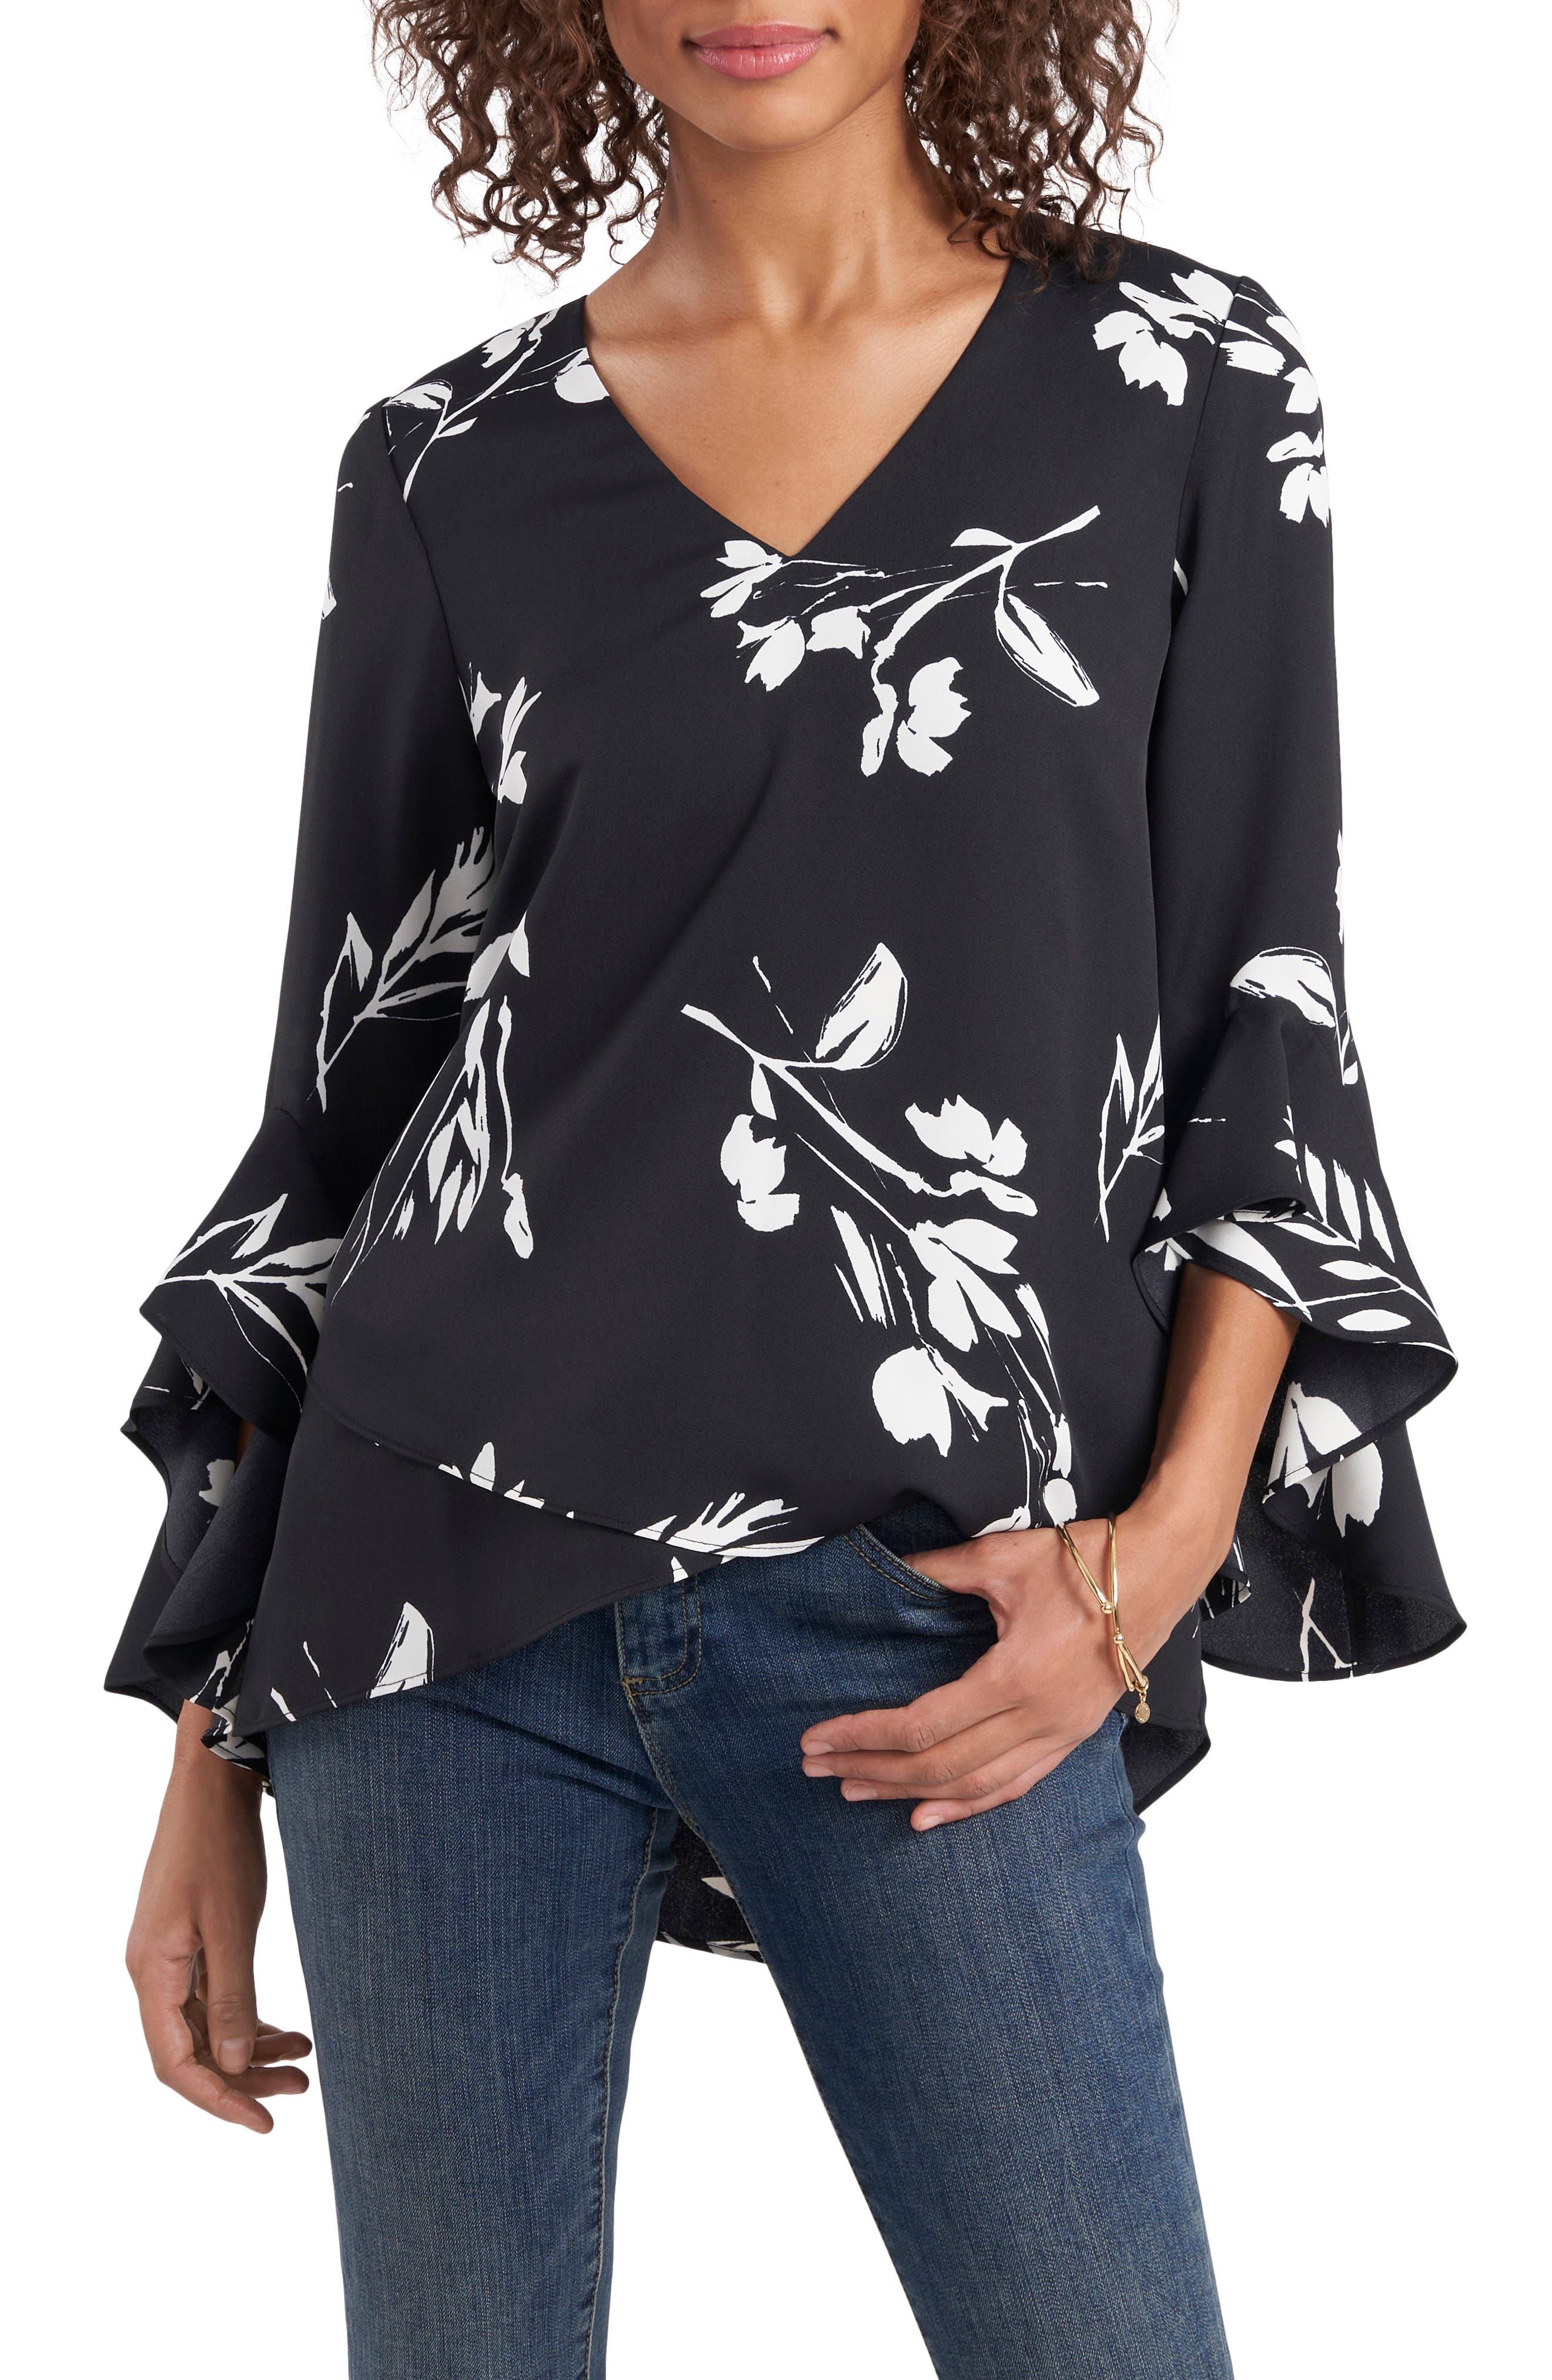 Vince Camuto Womens Printed High-Low Blouse Rich Black, XS